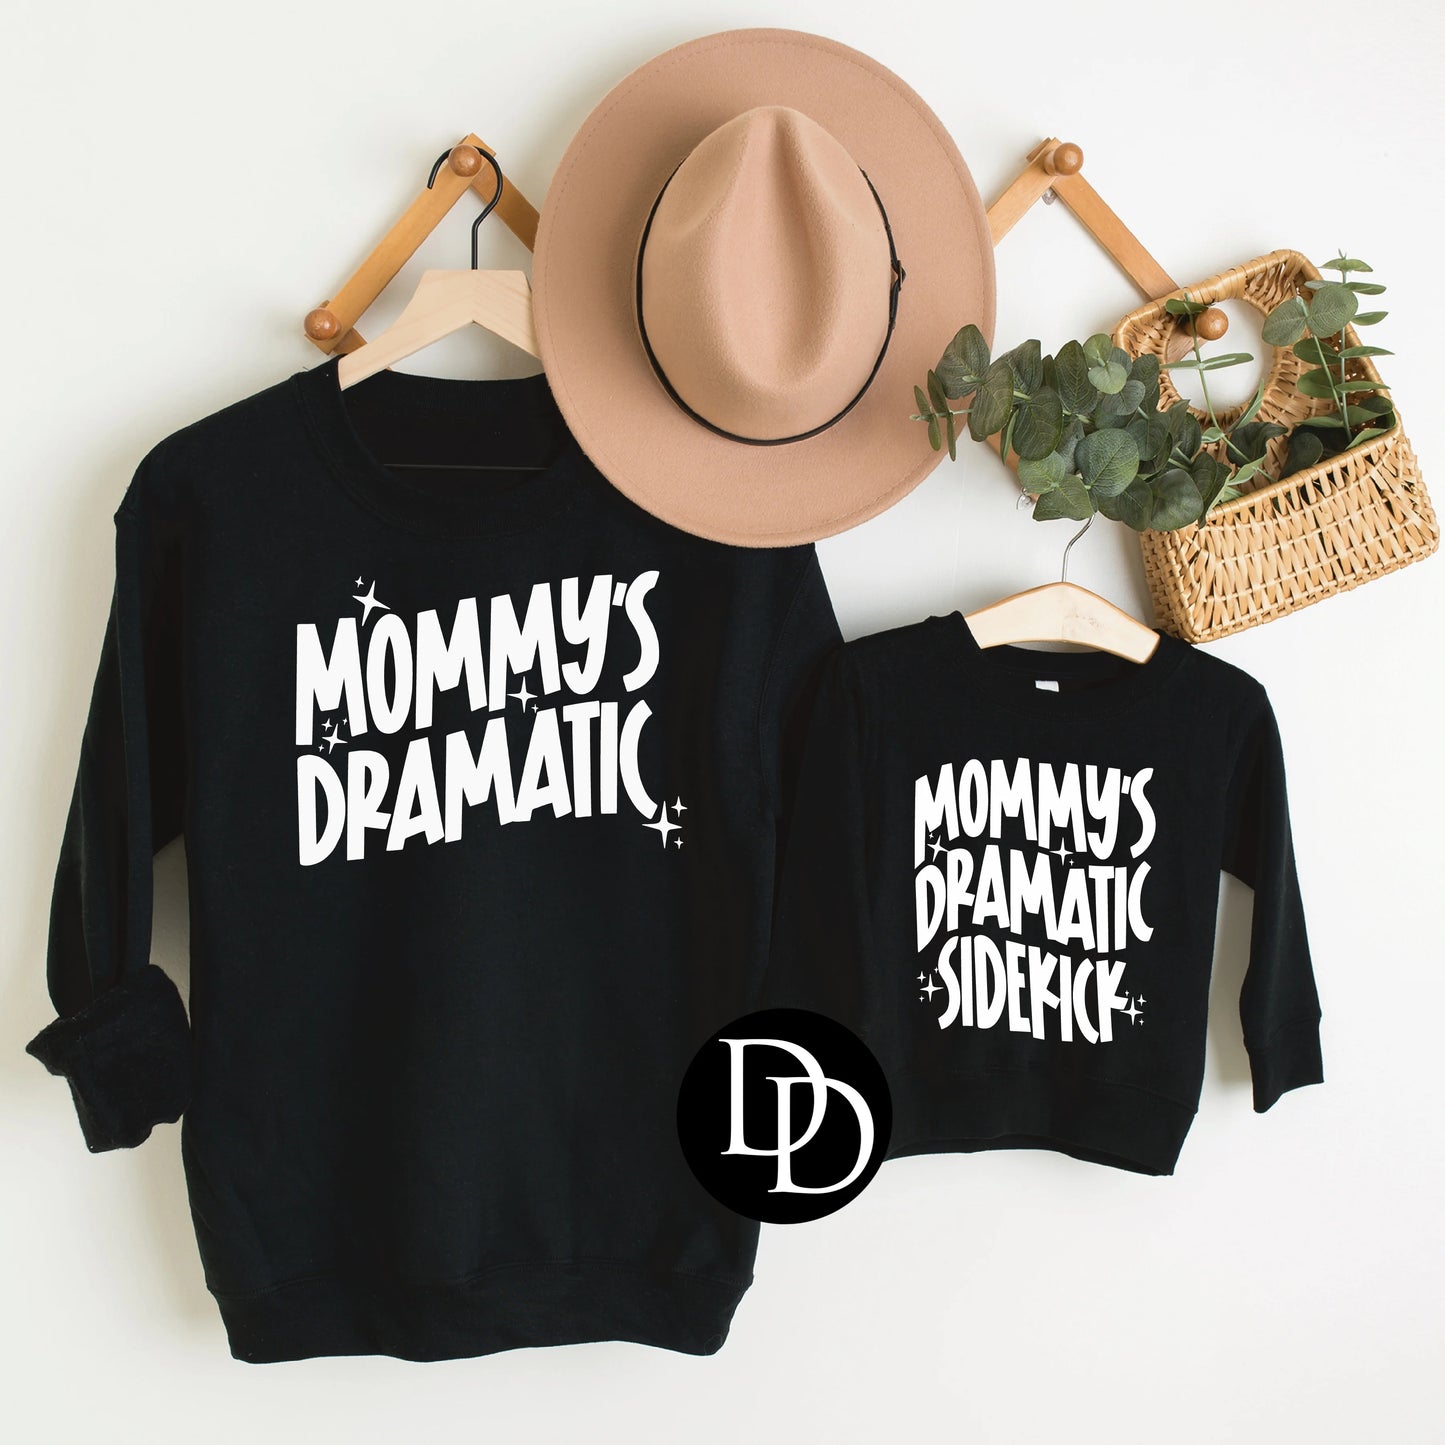 'Mommy's Dramatic' Graphic